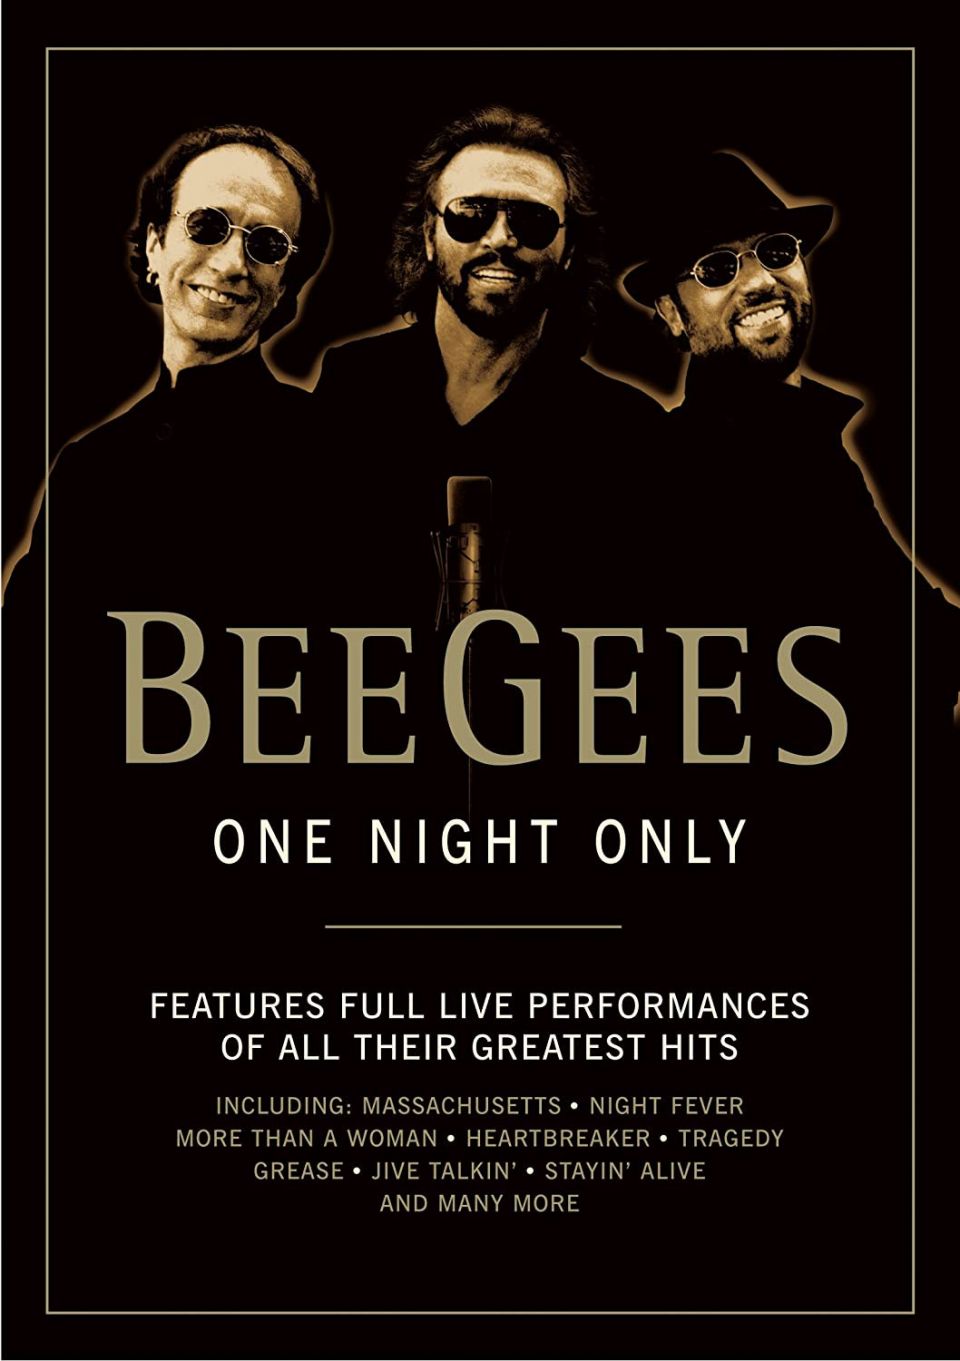 Bee Gees | One Night OnlyAmazon link: https://amzn.to/3lNKTe8